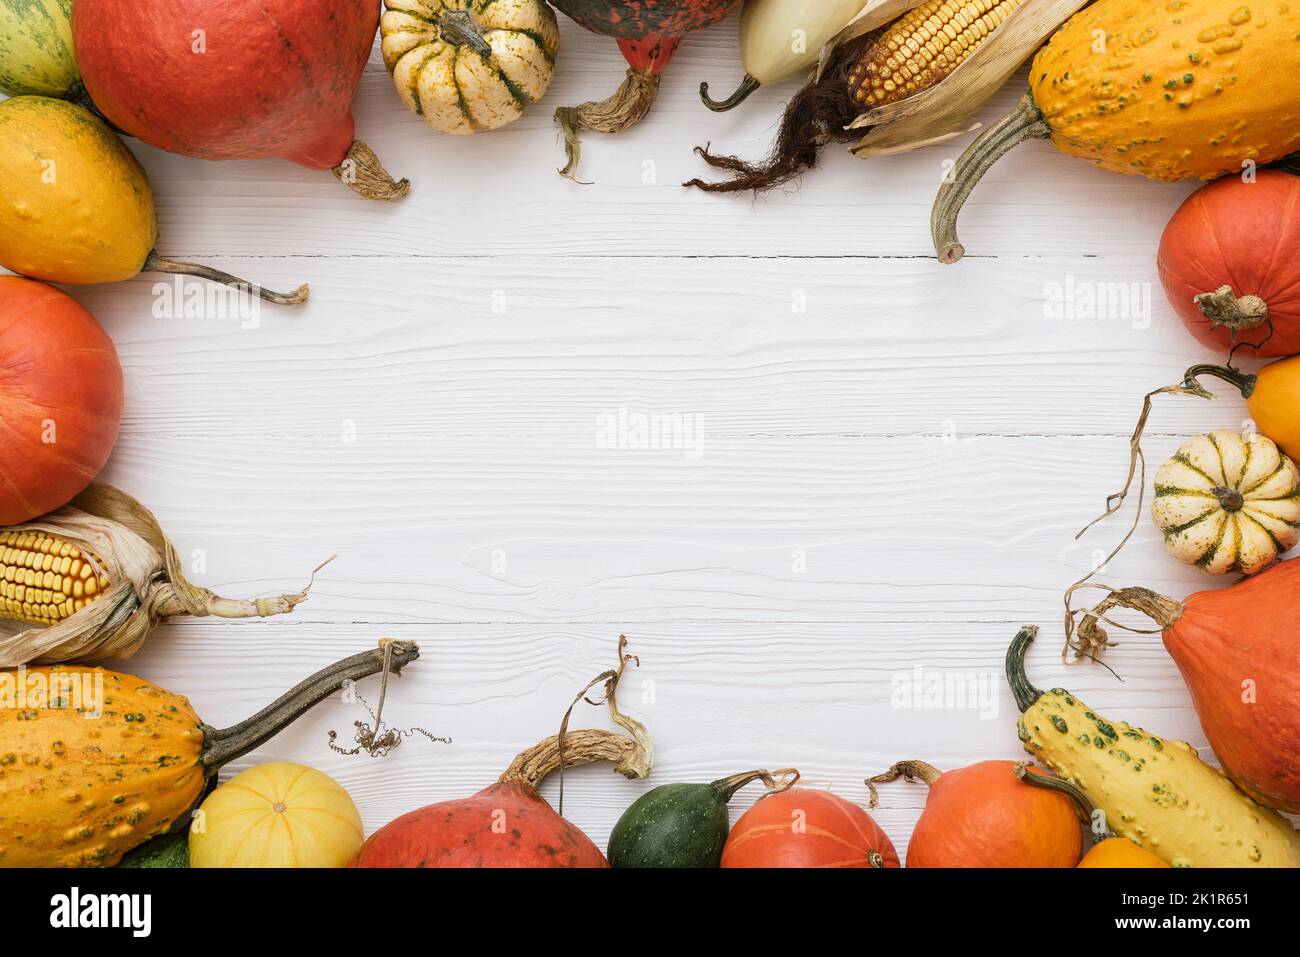 Thanksgiving holiday background with decorative frame of pumpkin harvest, winter squash and corncobs on white wooden table Stock Photo